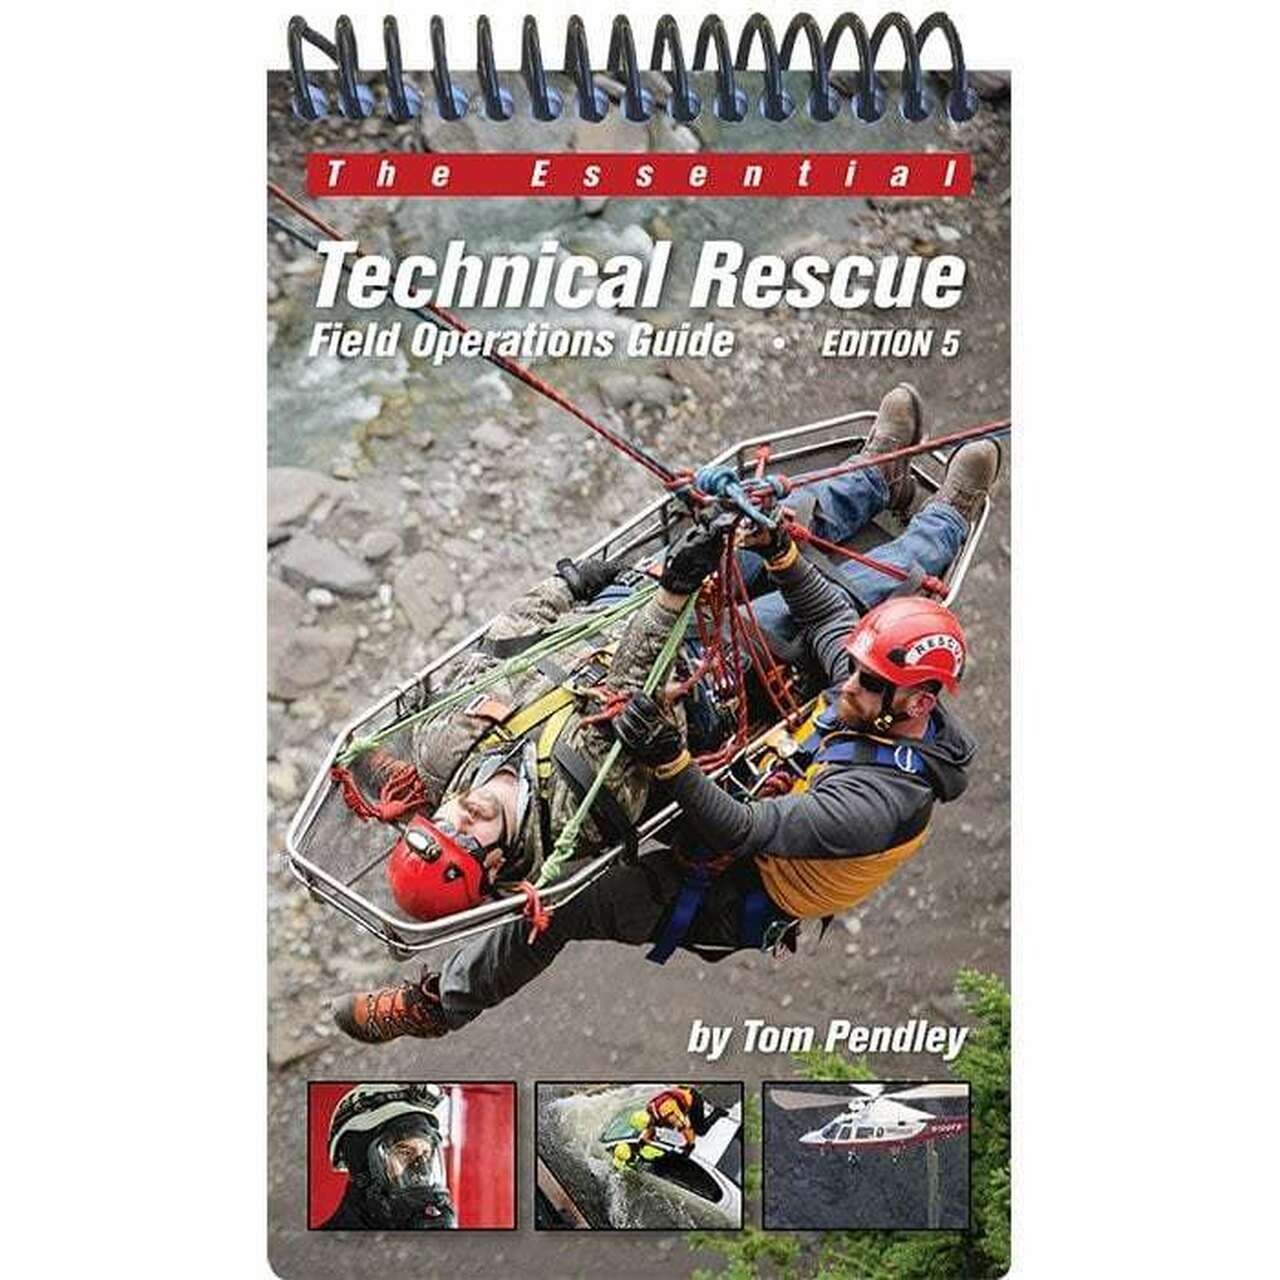 Technical Rescue Field Operations Guide, 5th Edition